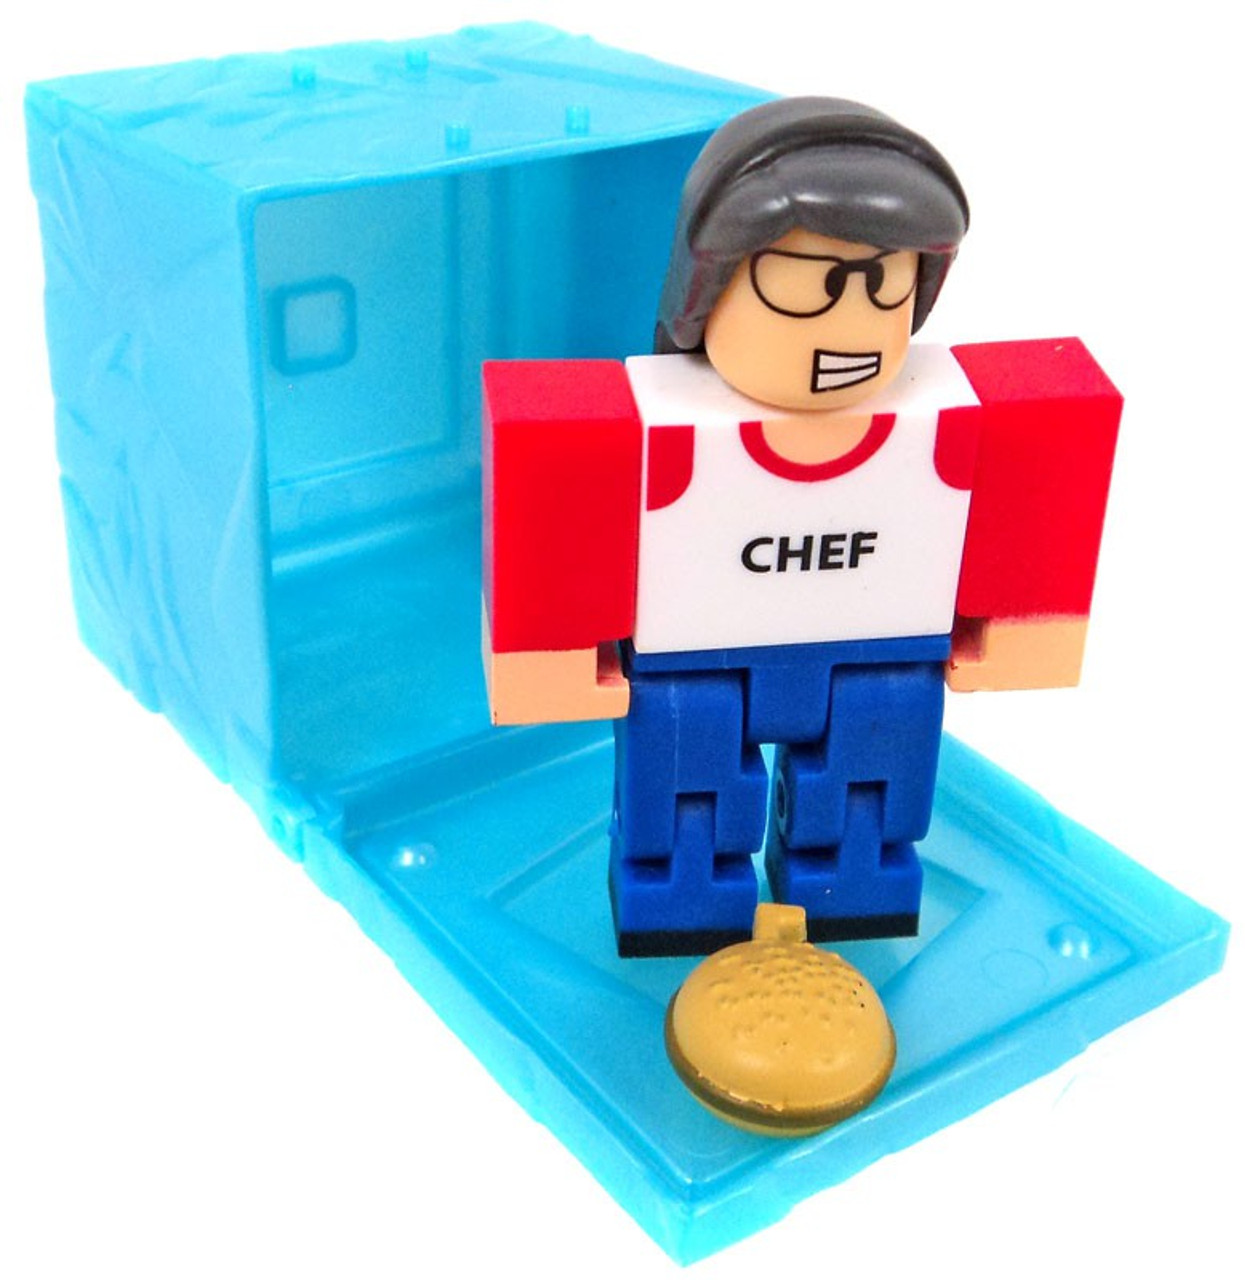 Roblox Red Series 3 High School Life Lunch Lady 3 Mini Figure Blue Cube With Online Code Loose Jazwares Toywiz - high school life promo roblox